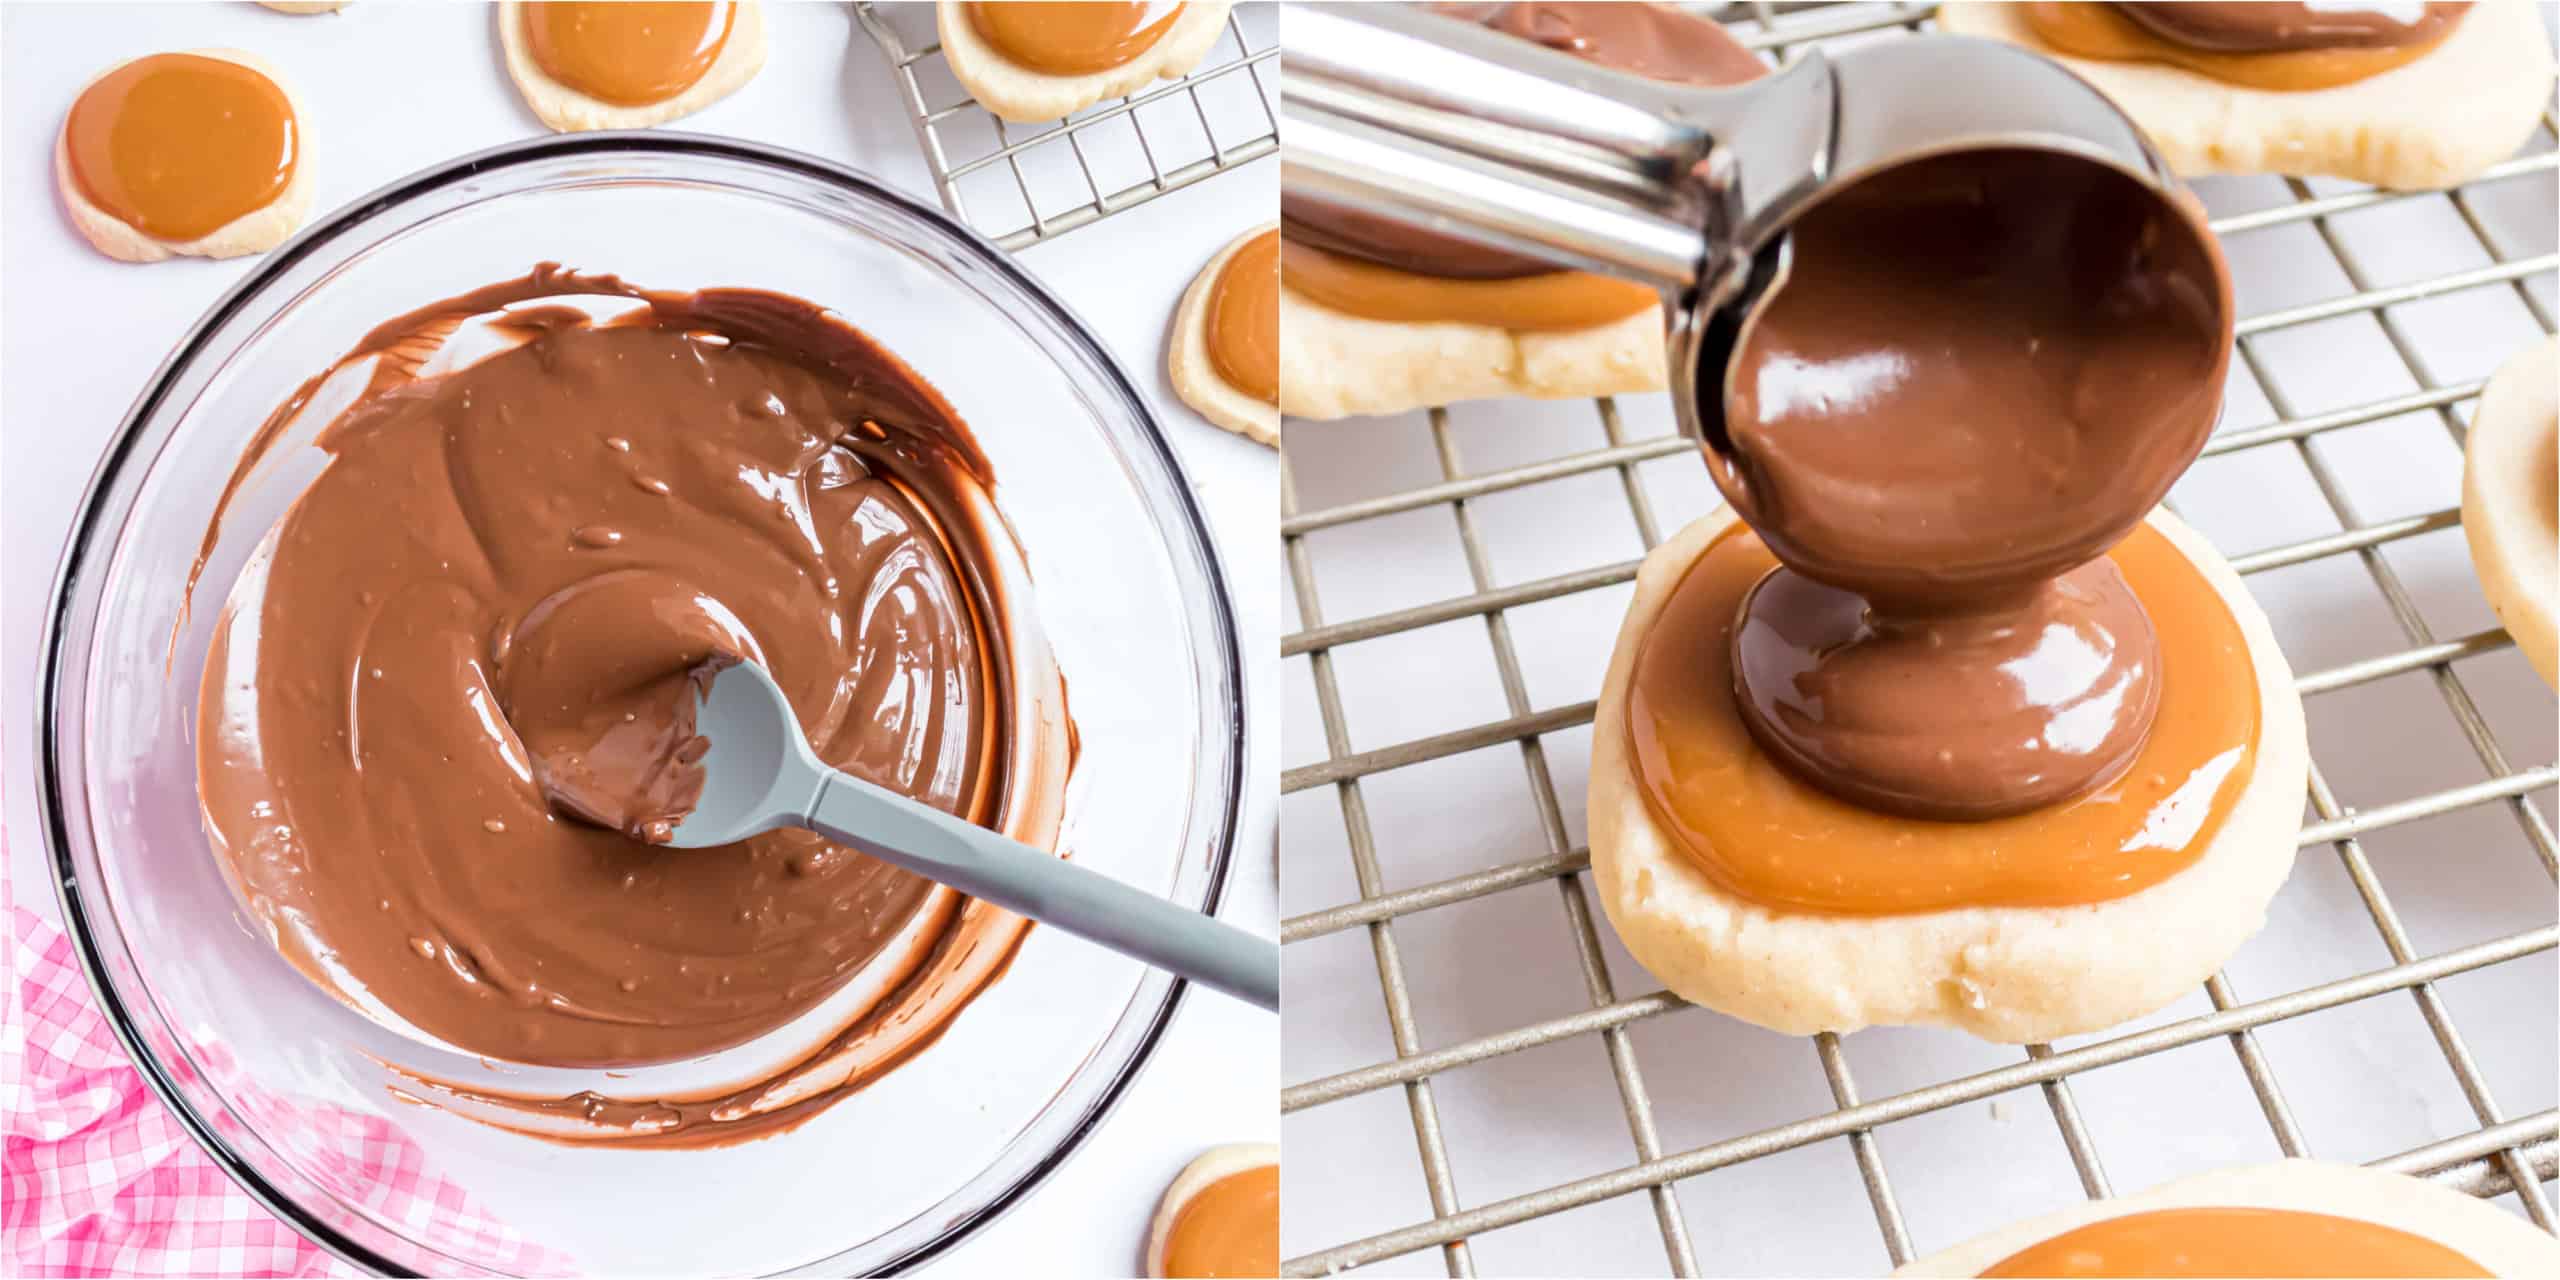 Step by step photos showing how to make chocolate layer of twix cookies.